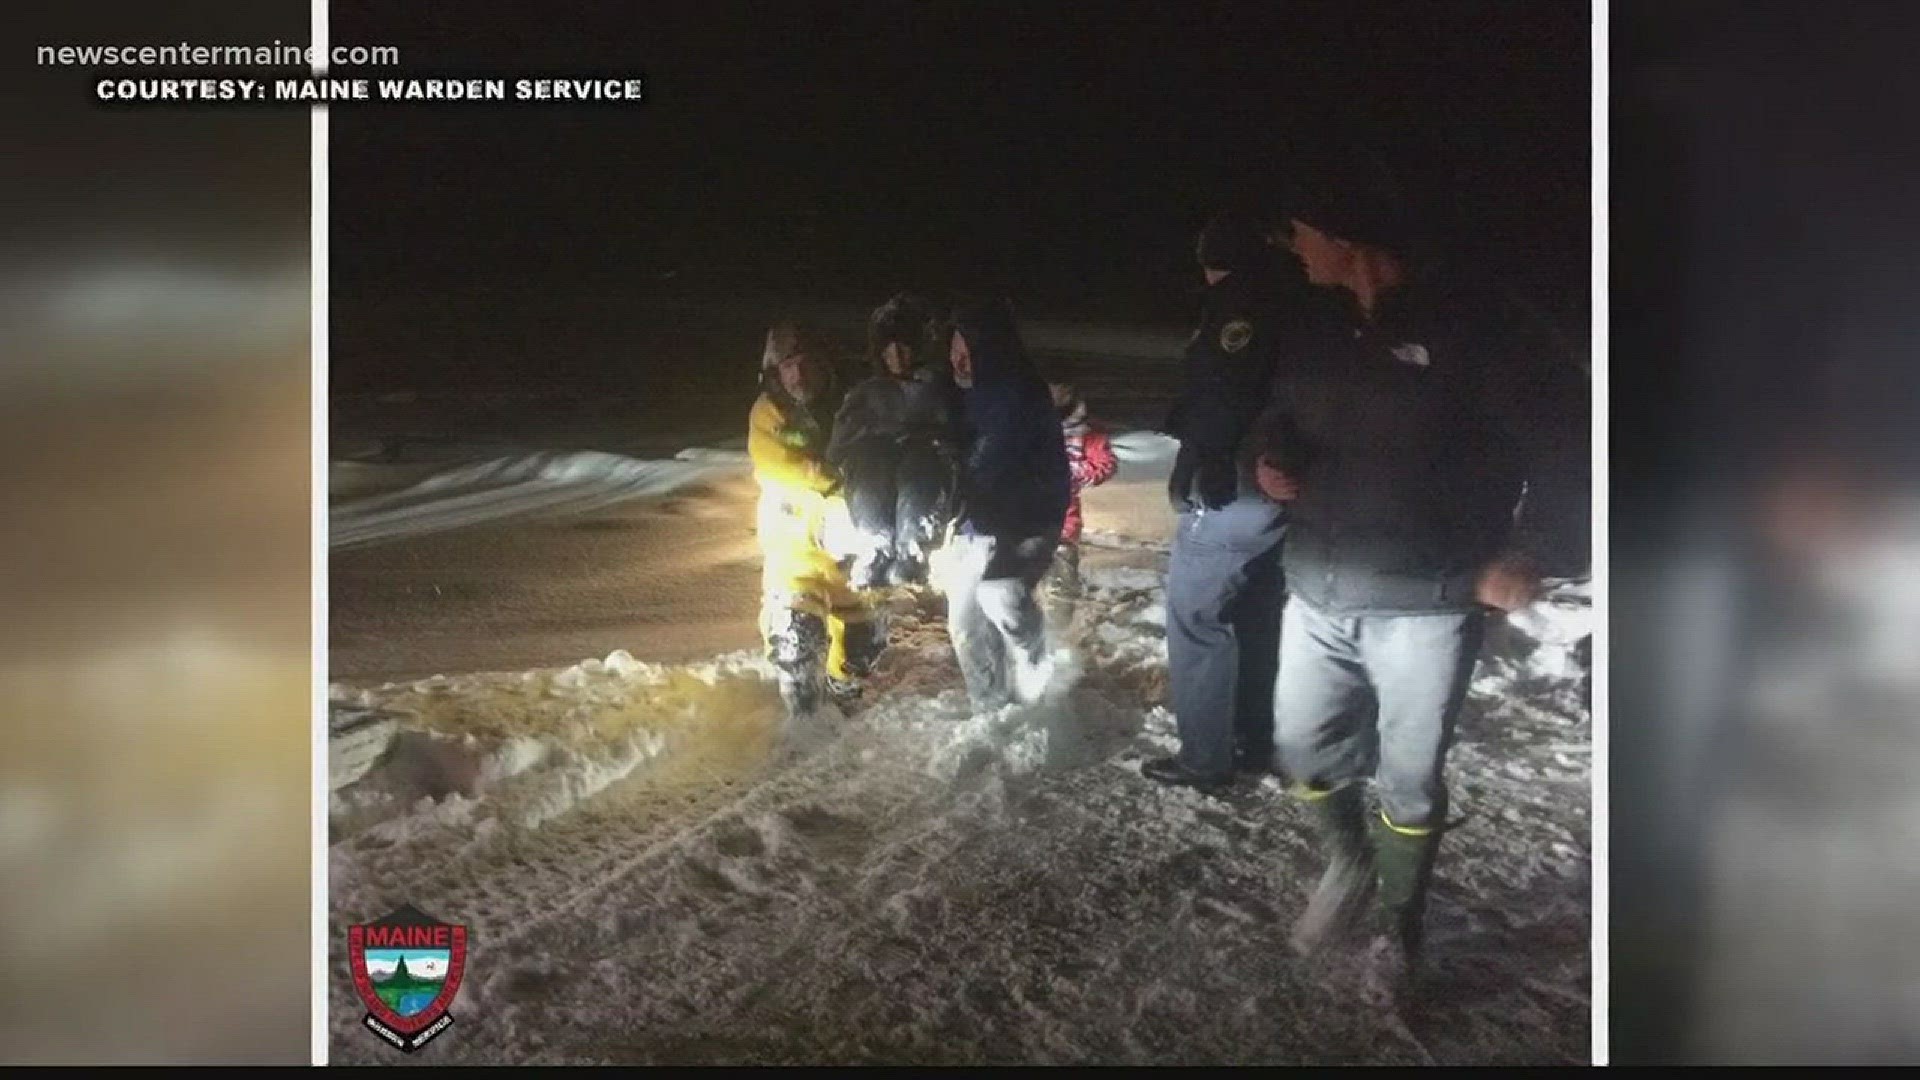 Dangerous ice warning after several rescues